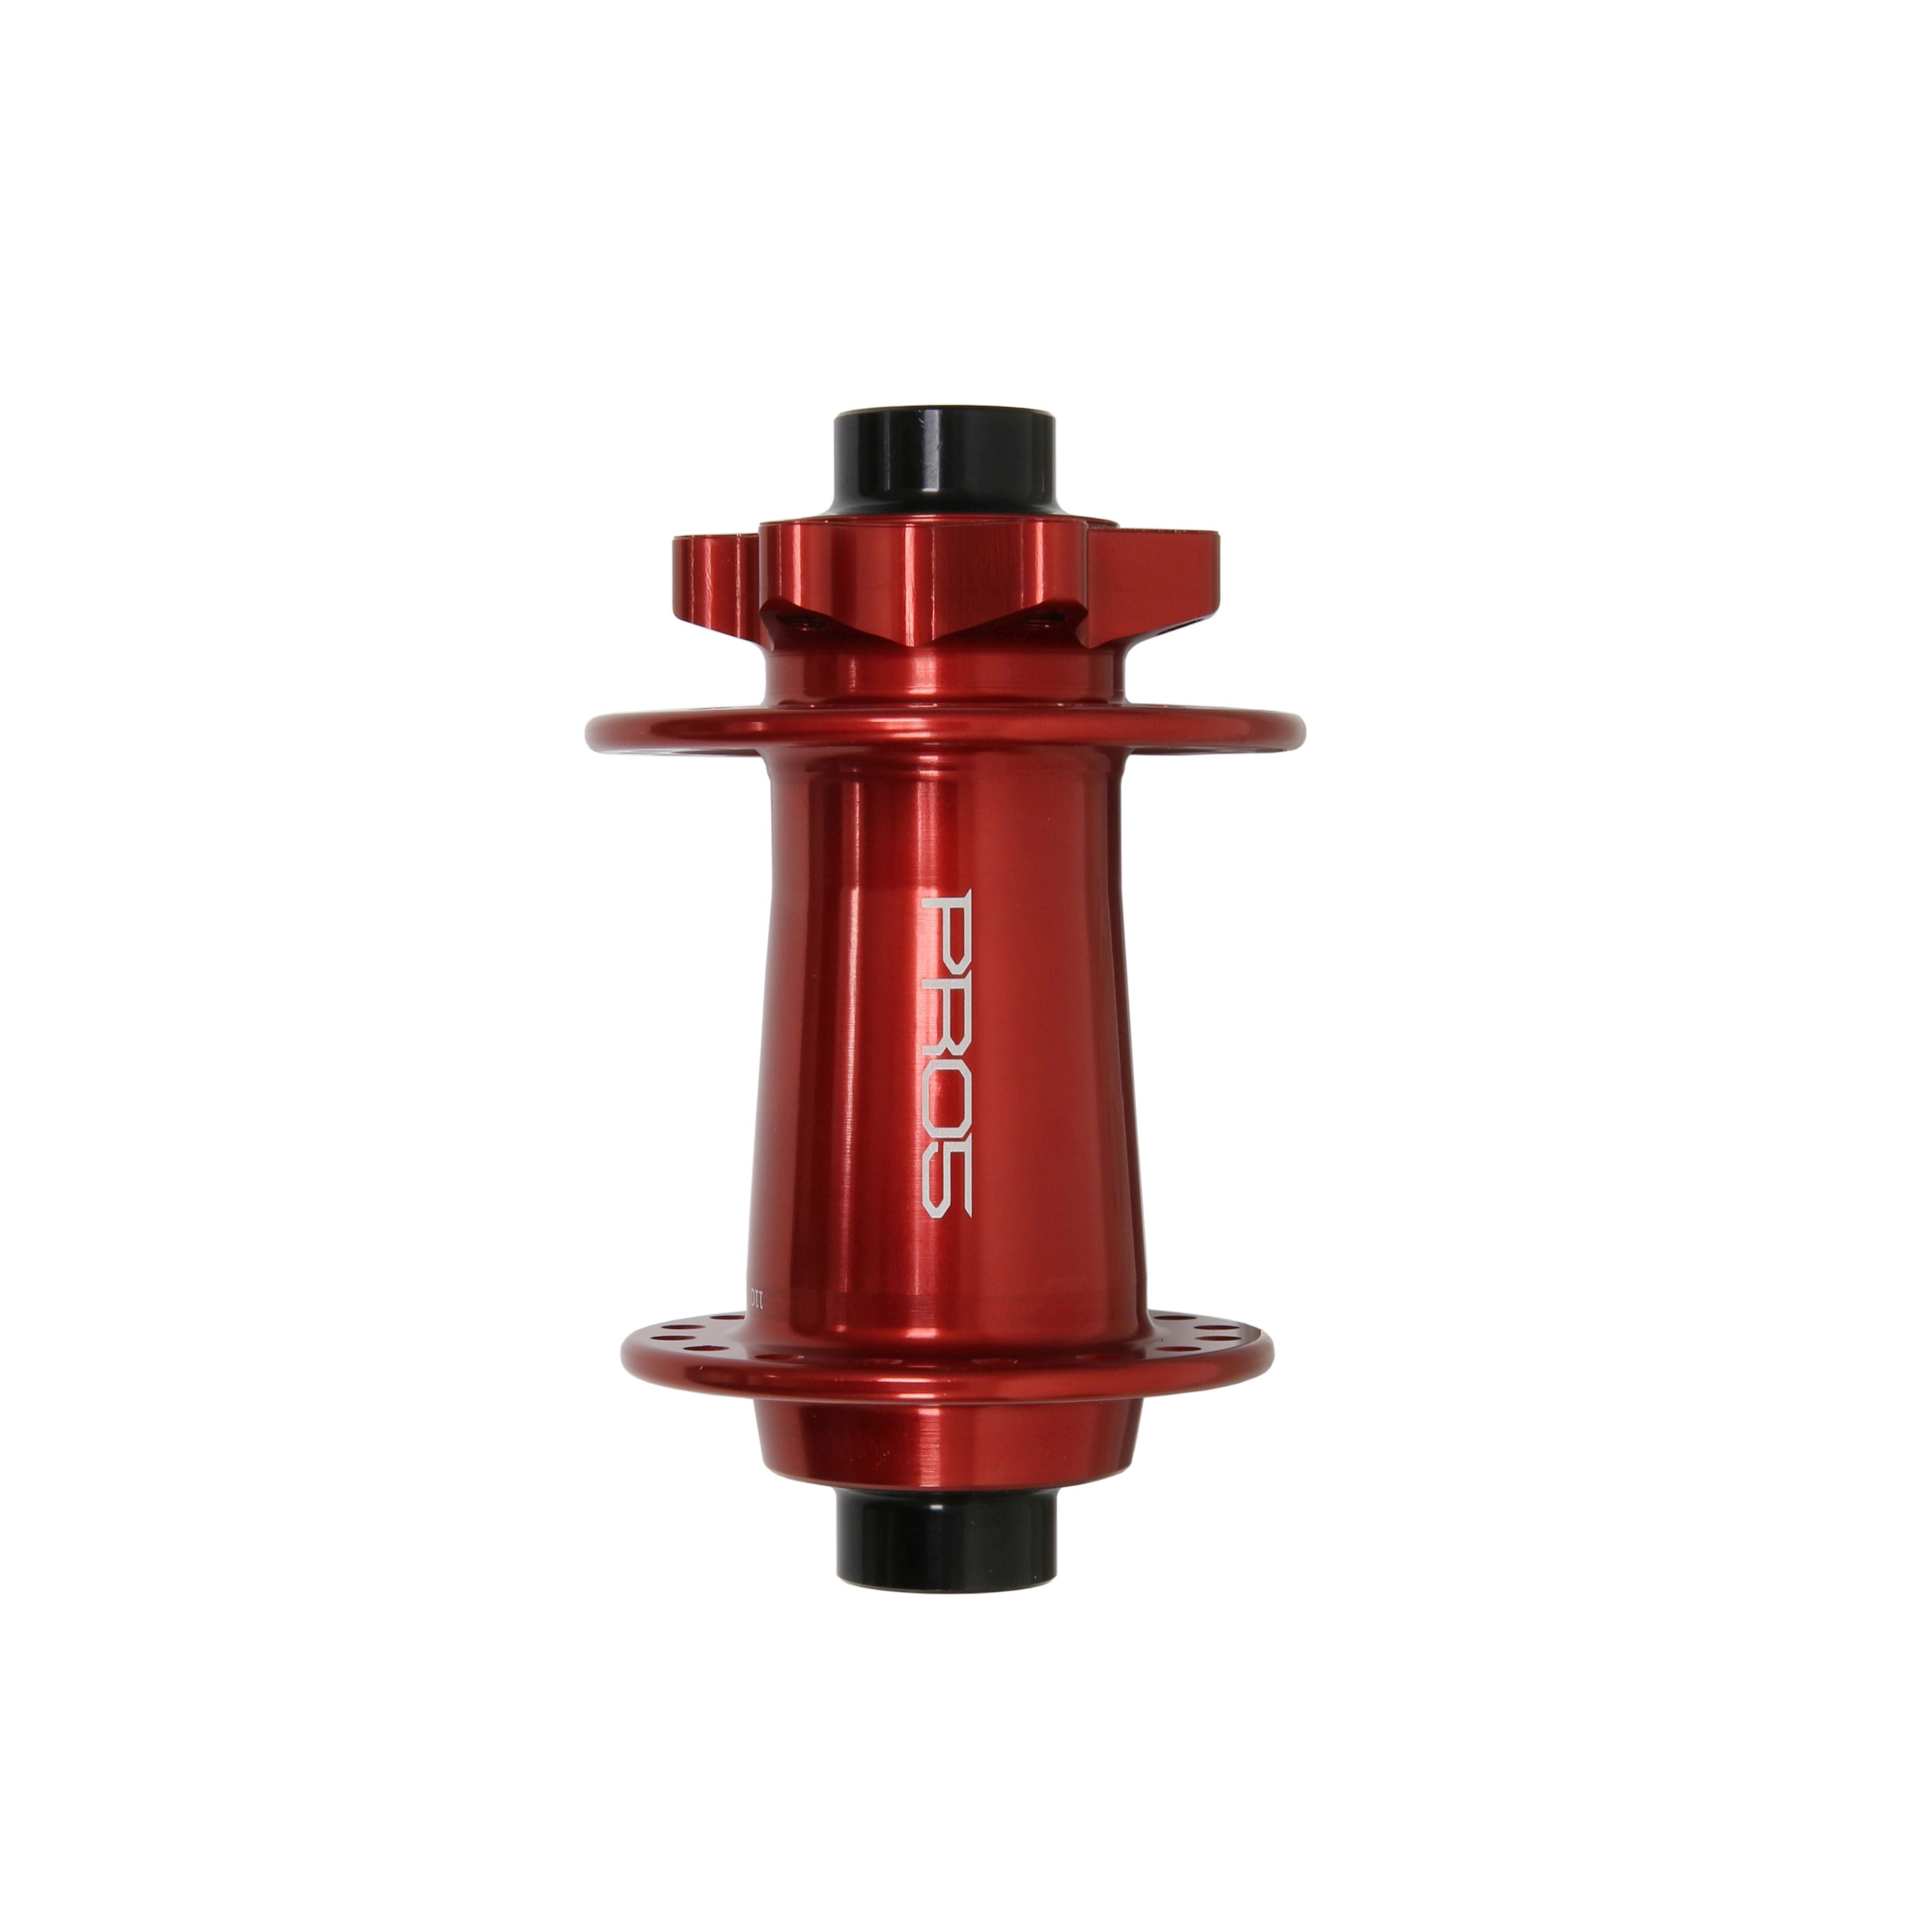 Hope Pro 5 Front Hub 110x15mm 6 Bolt Red 